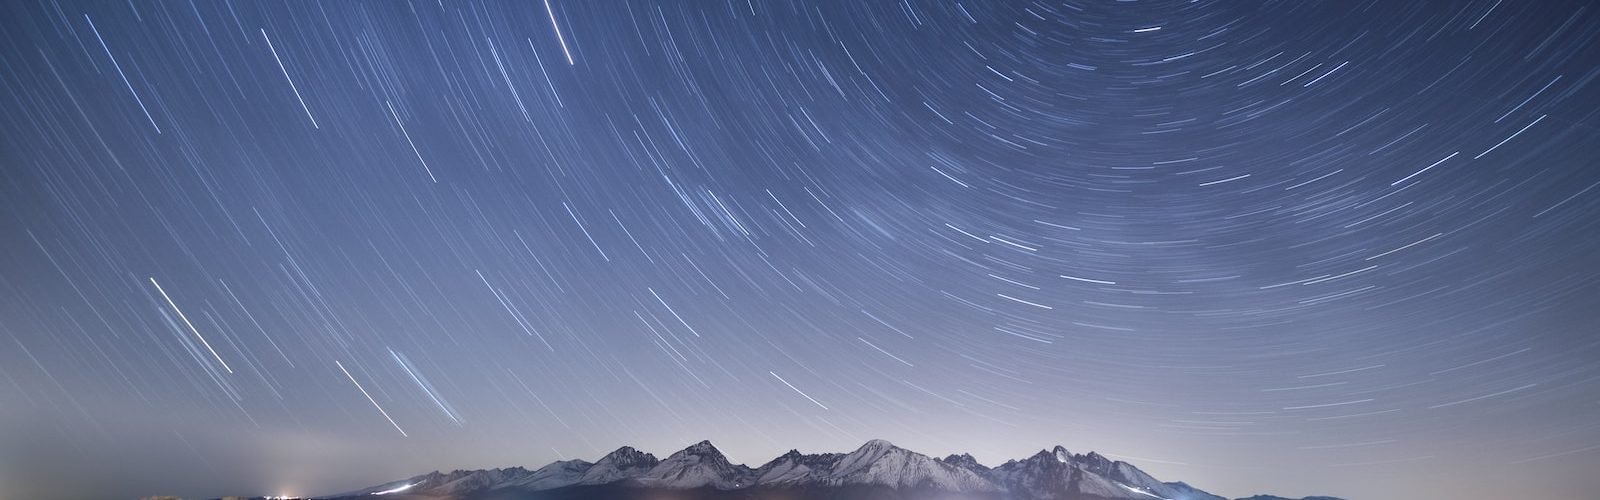 time lapse photo of stars